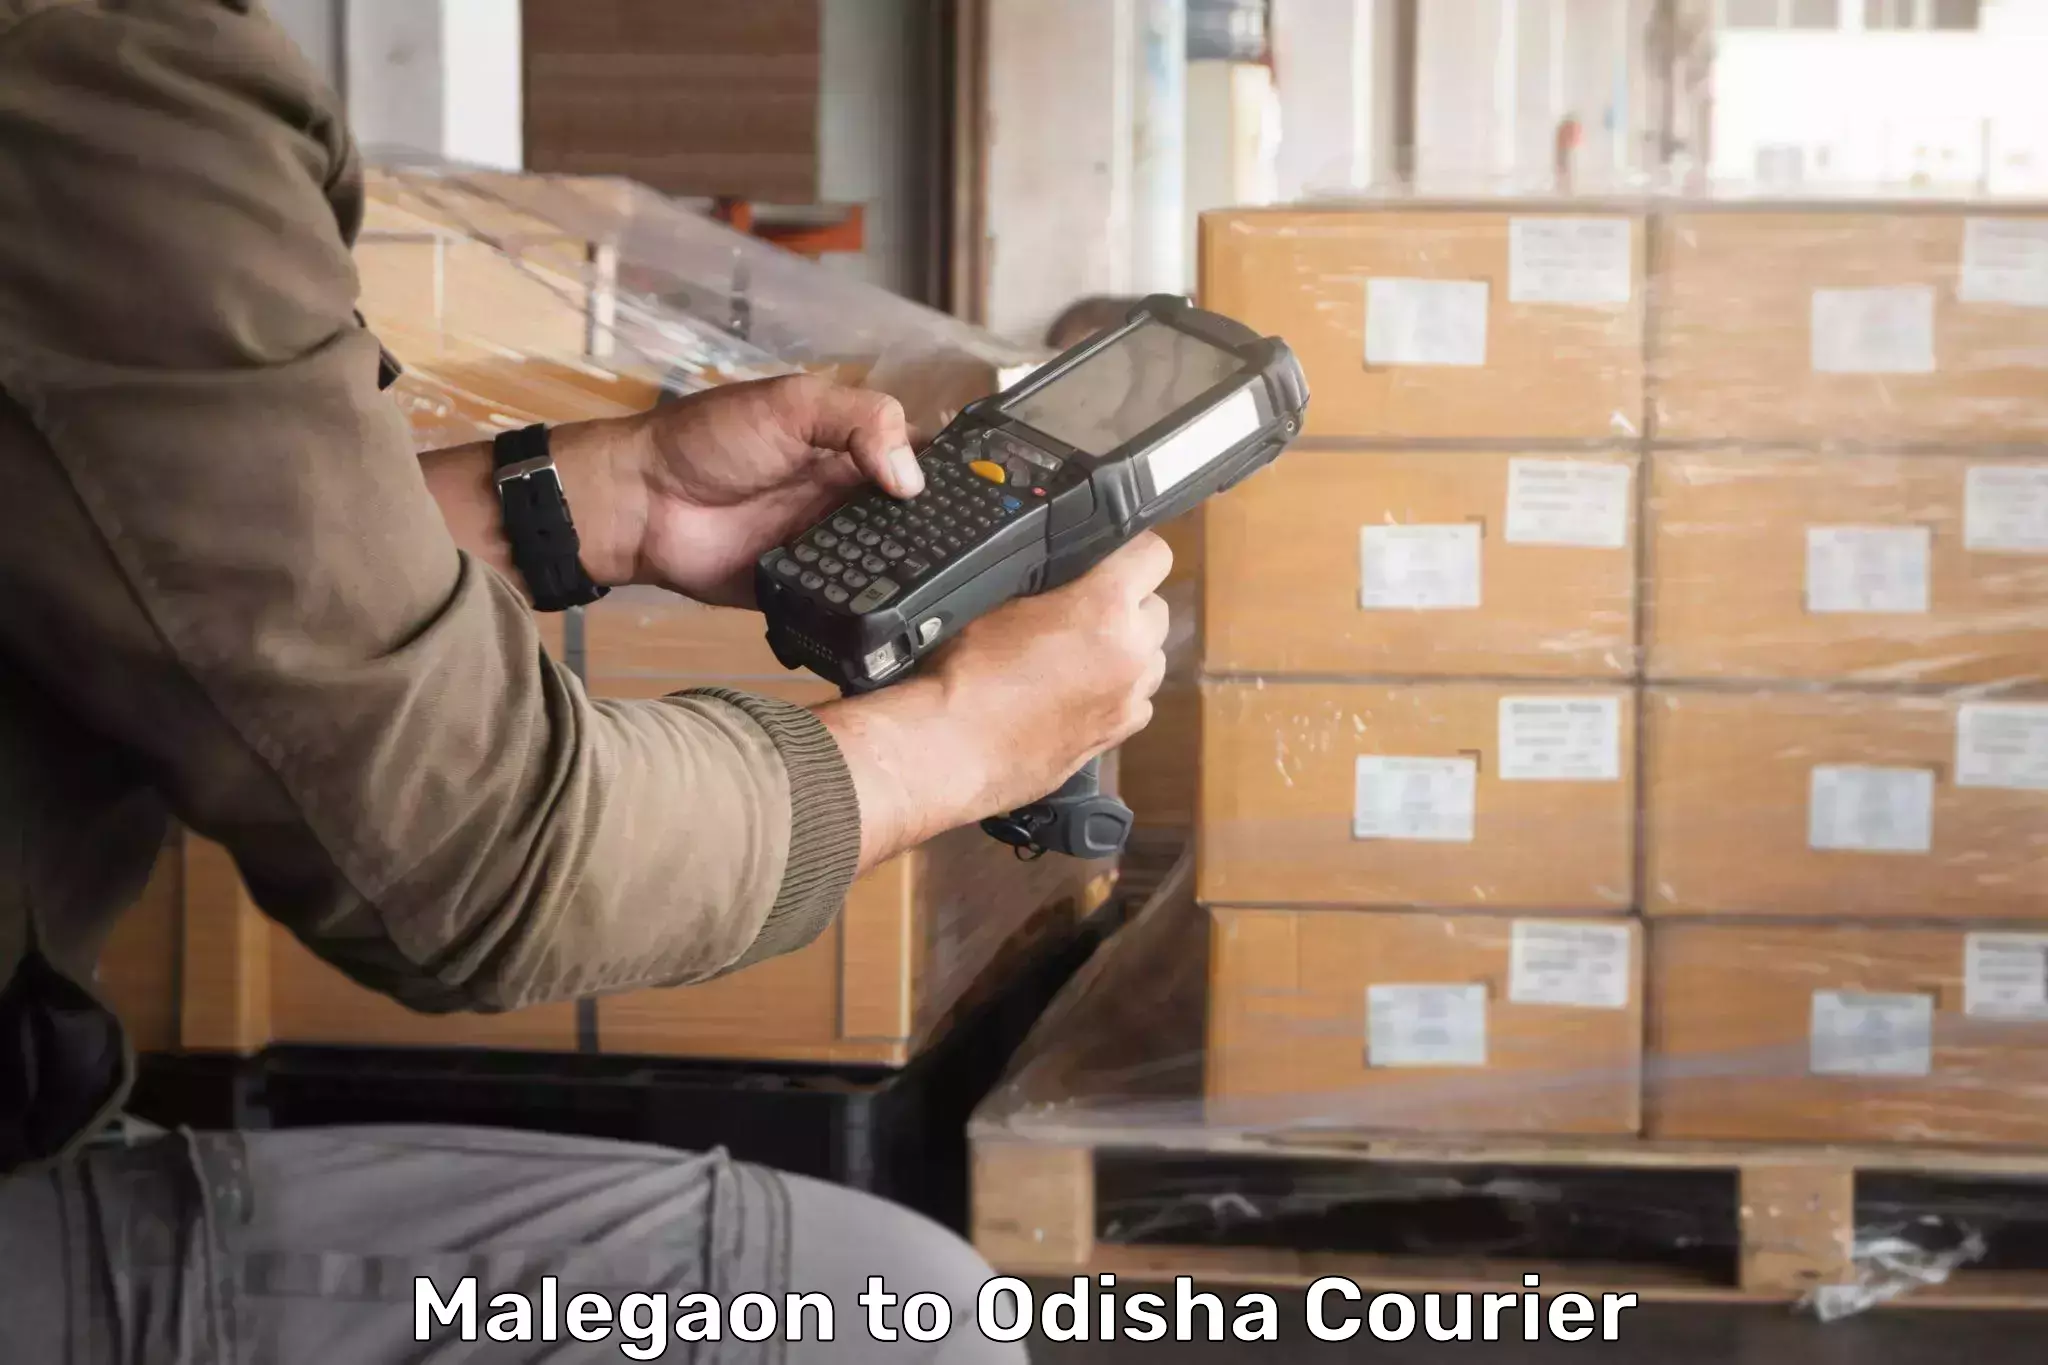 Reliable courier service in Malegaon to Raighar